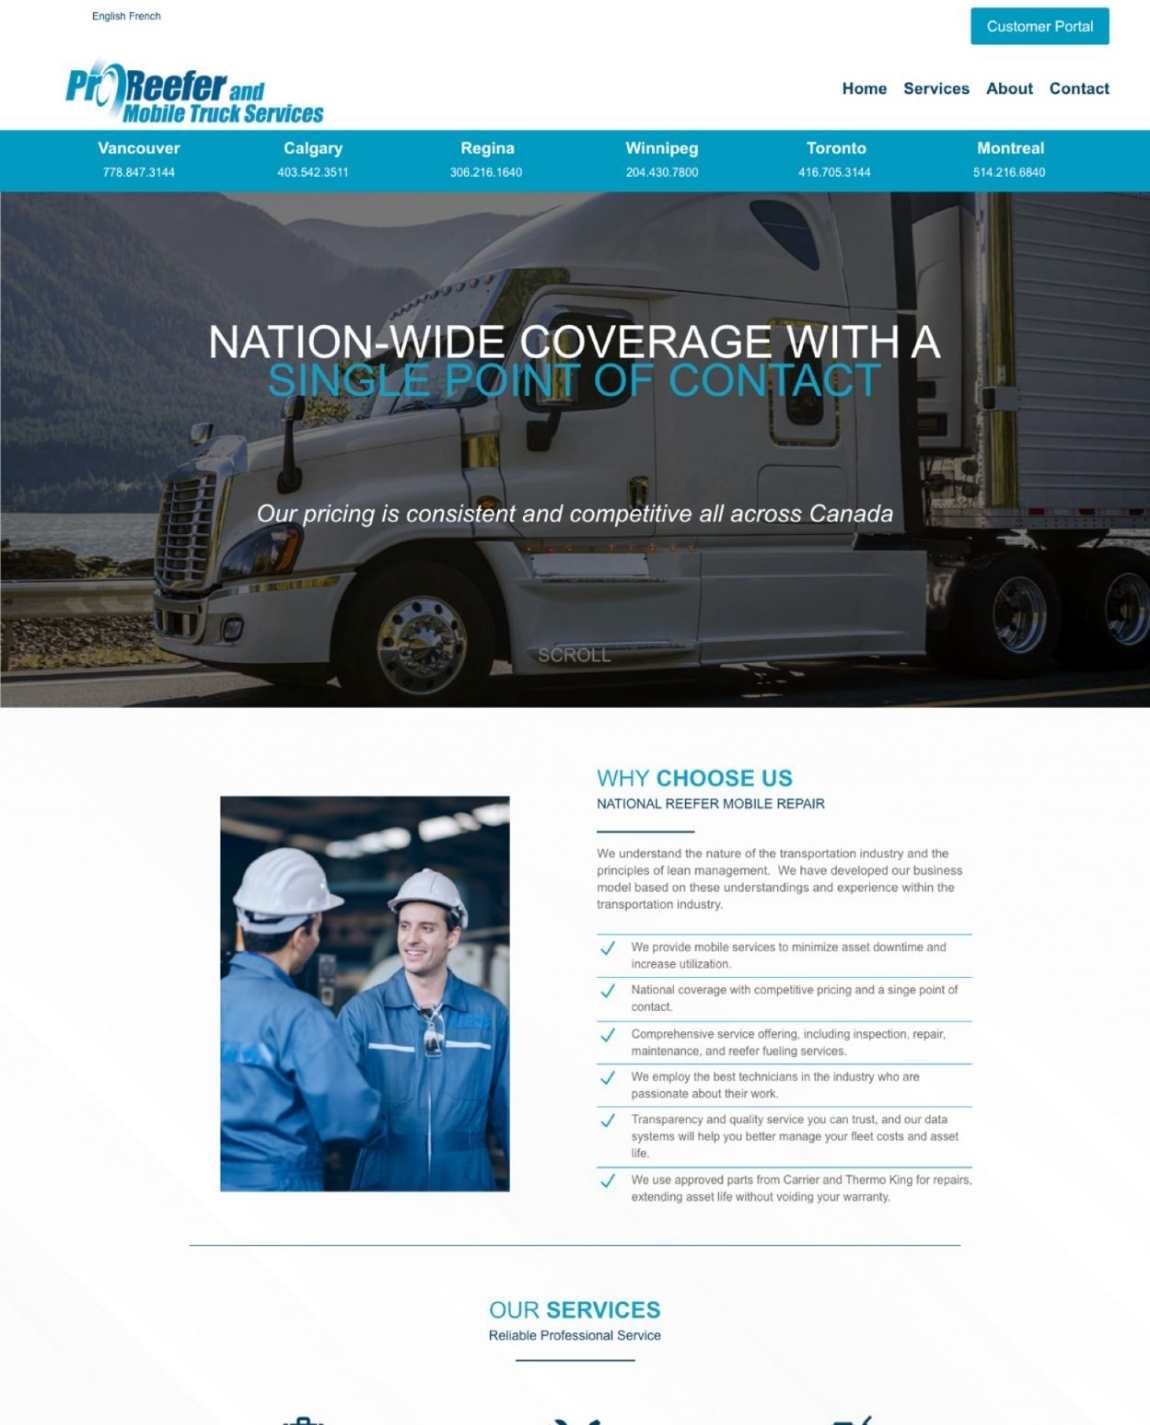 ProReefer Truck Services